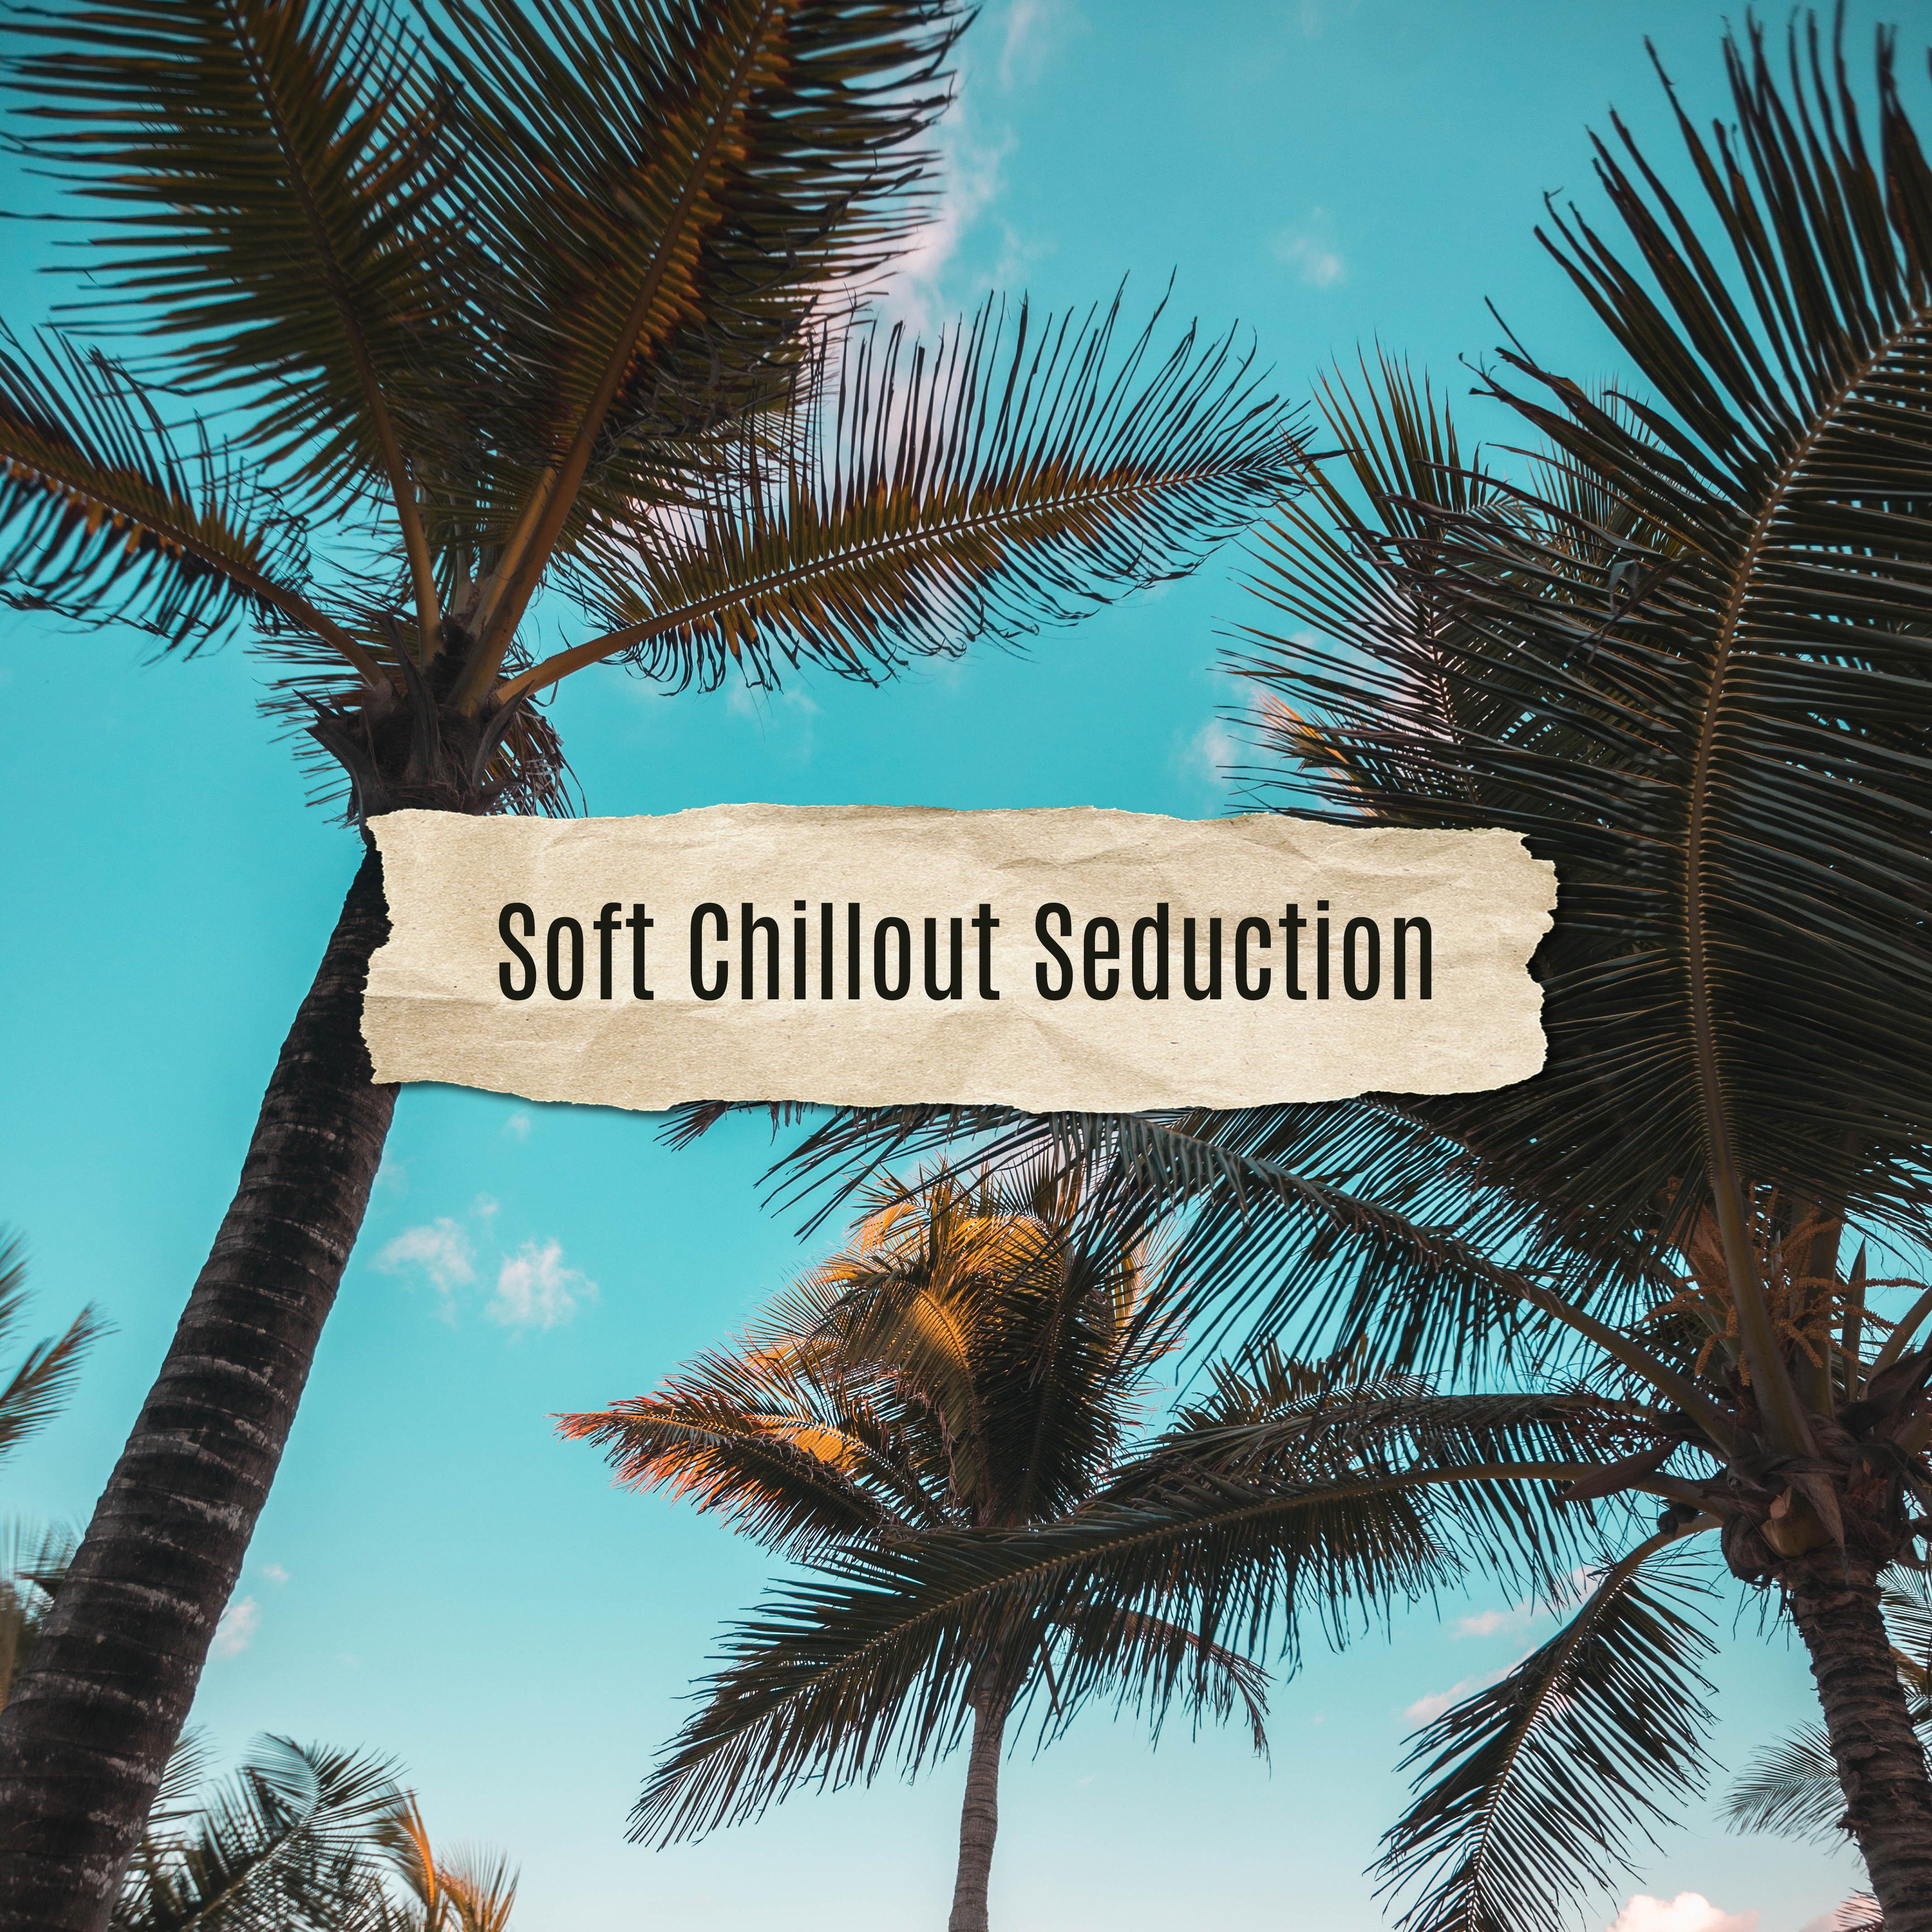 Soft Chillout Seduction: Compilation of 2019 Slow Chill Out Music, Perfect Relaxation Vibes, Celebrate Your Summer Vacation, Best Relax on the Tropical Beach Background Anthems